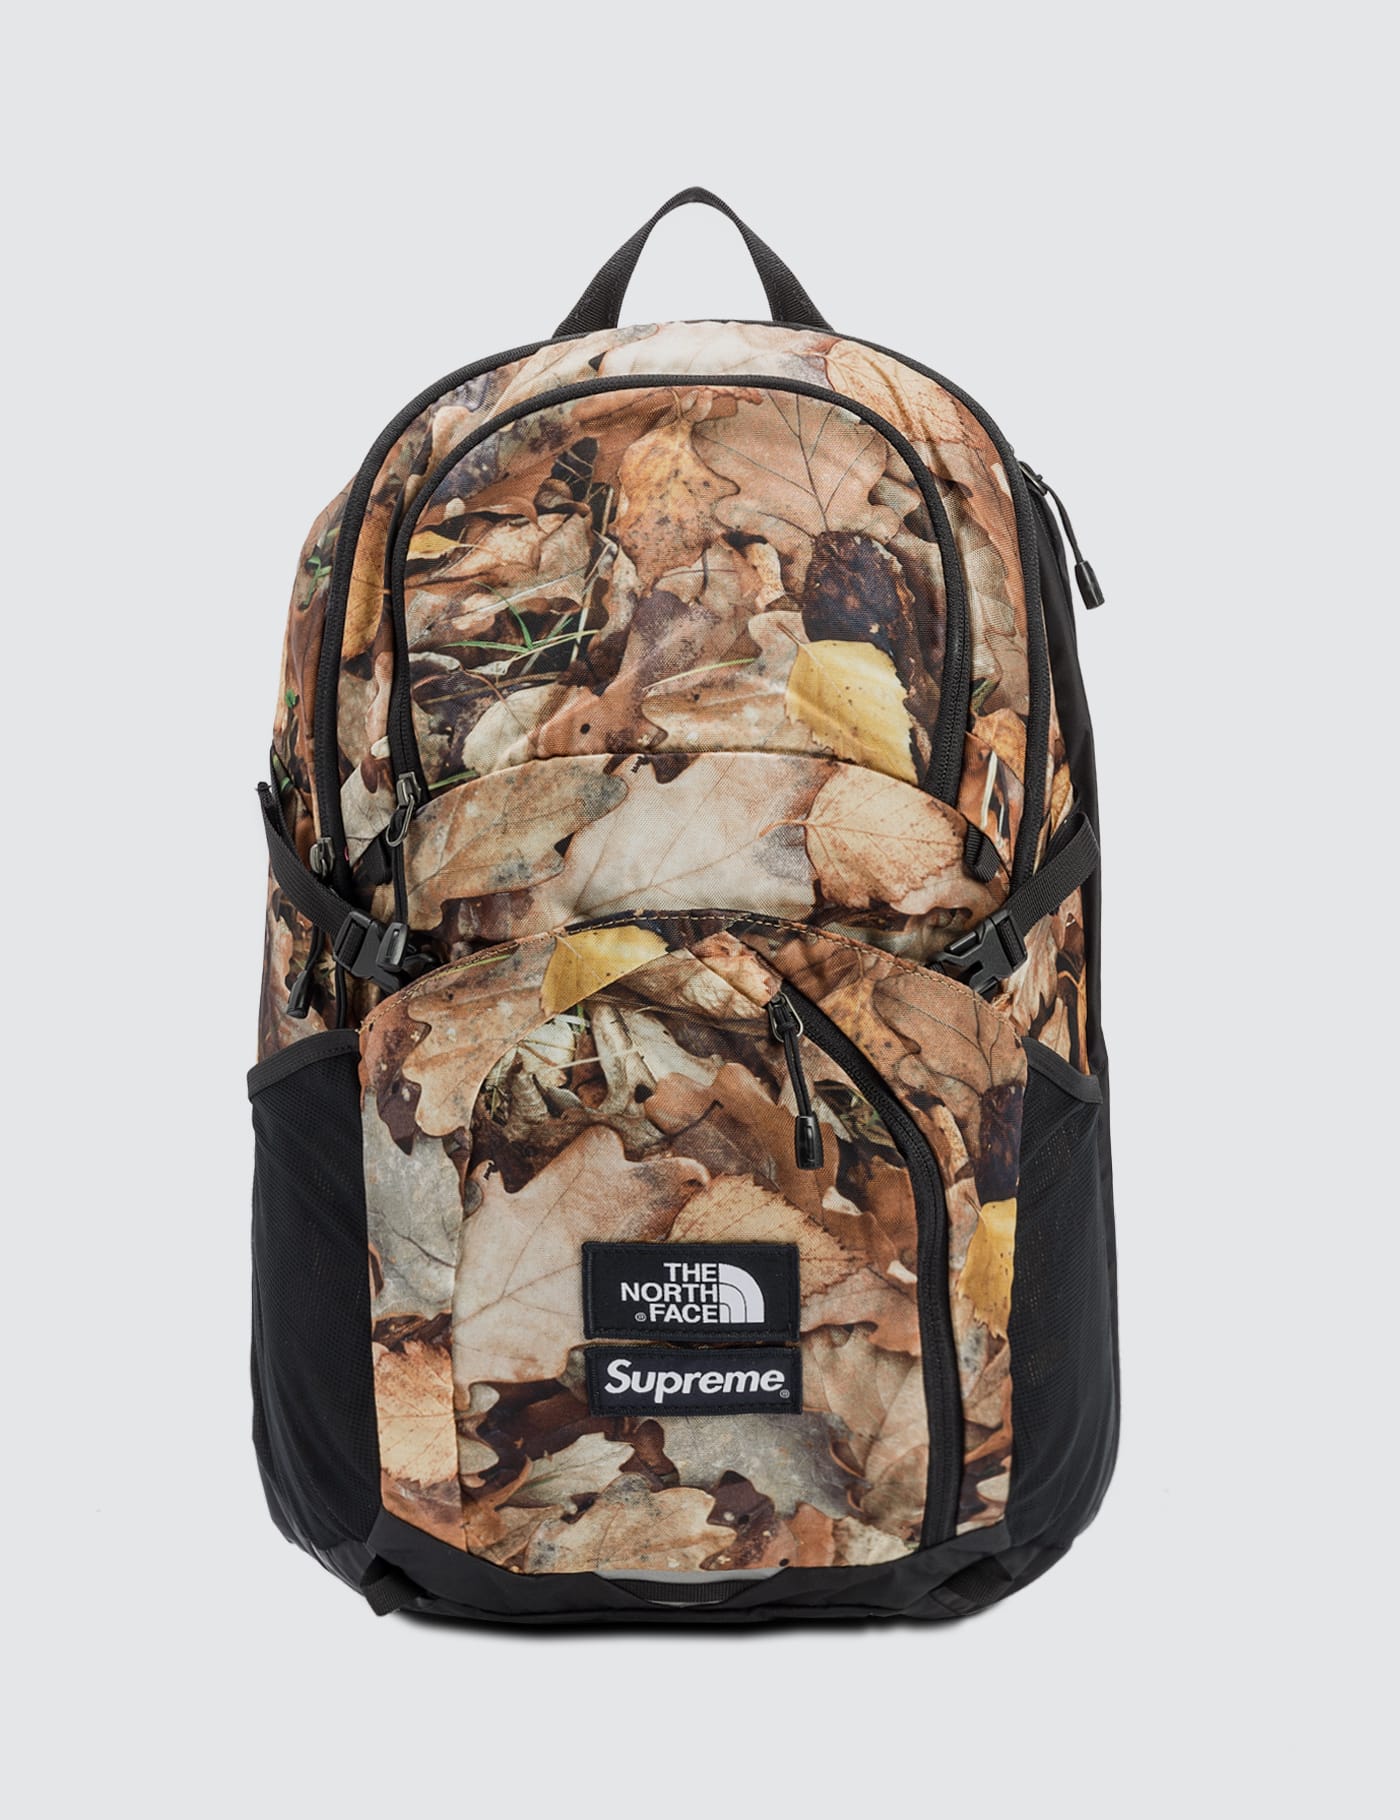 Supreme - The North Face X Supreme Backpack 